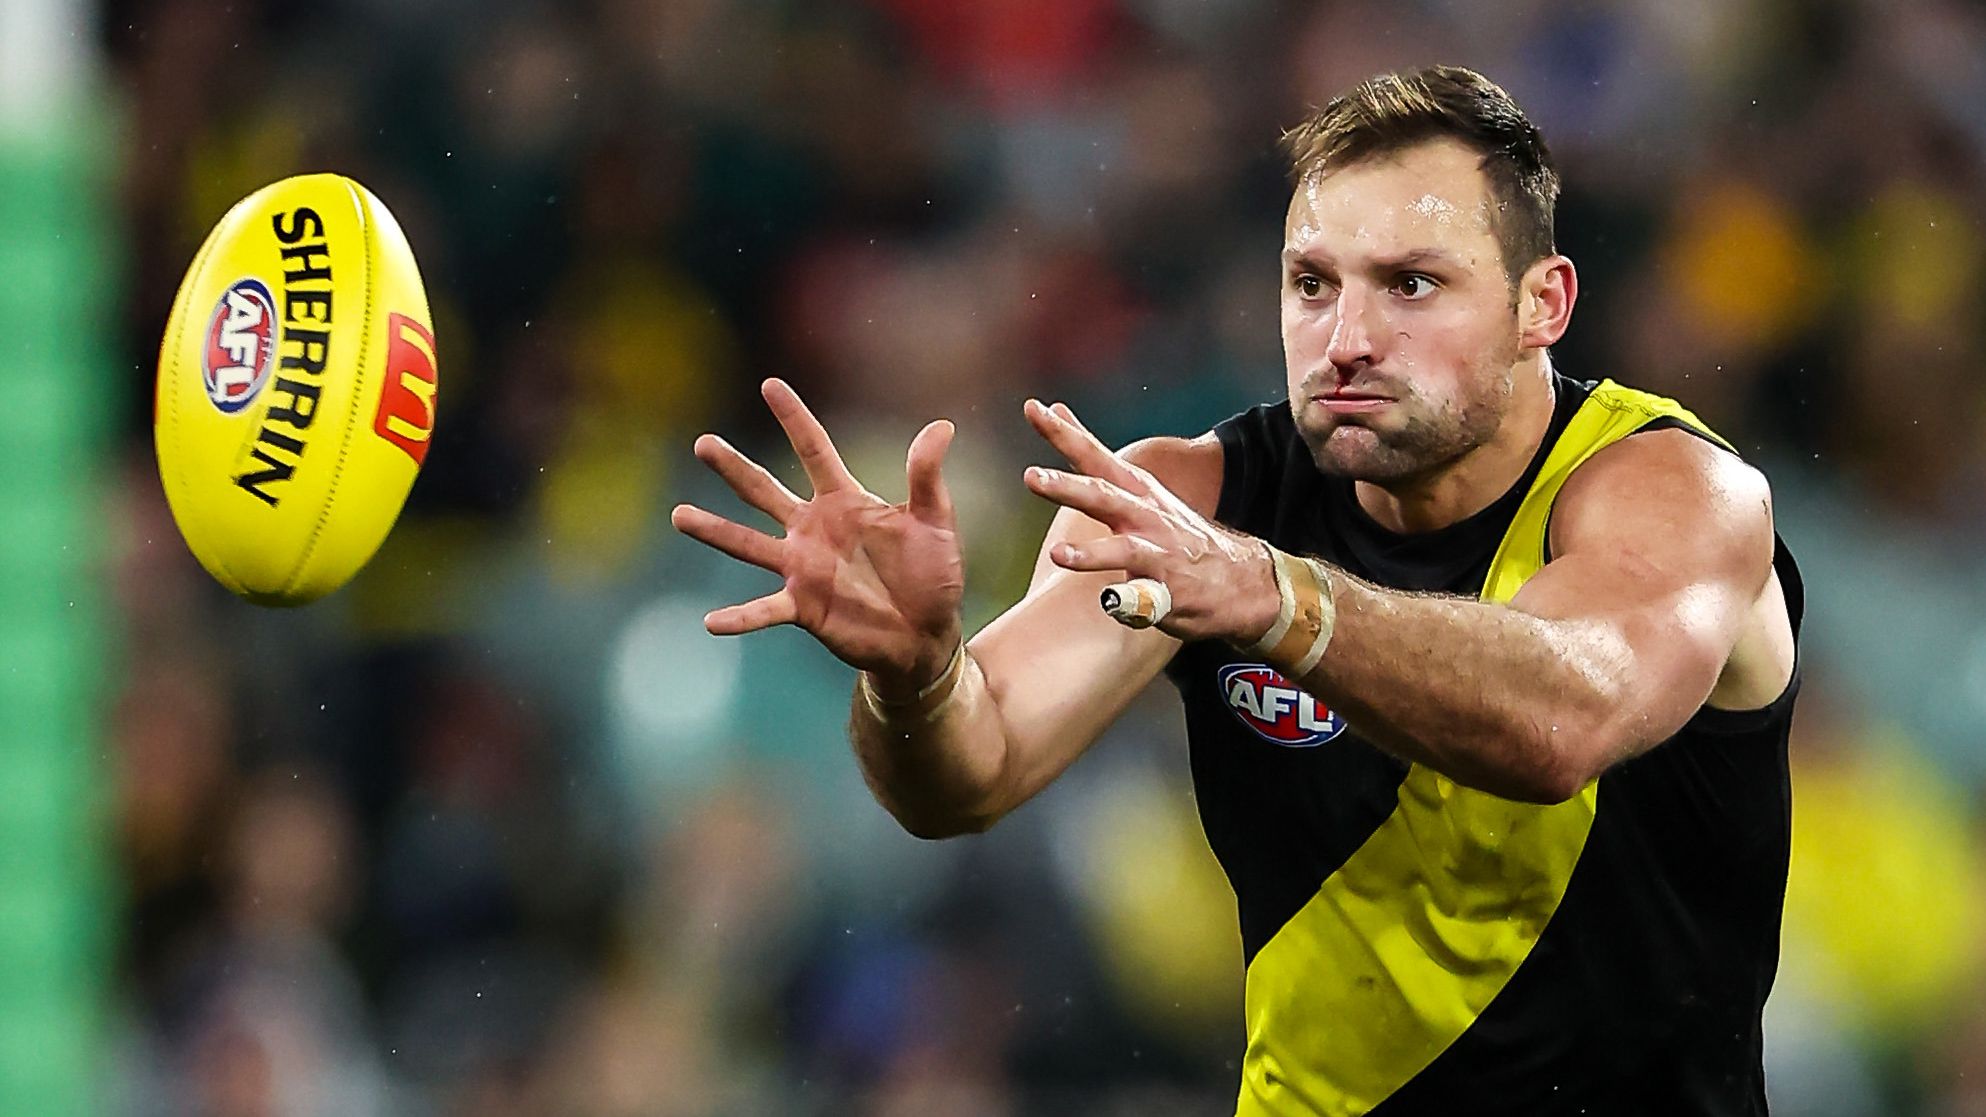 Richmond skipper Toby Nankervis reveals apology to Jake Lloyd as ban looms after ugly hit